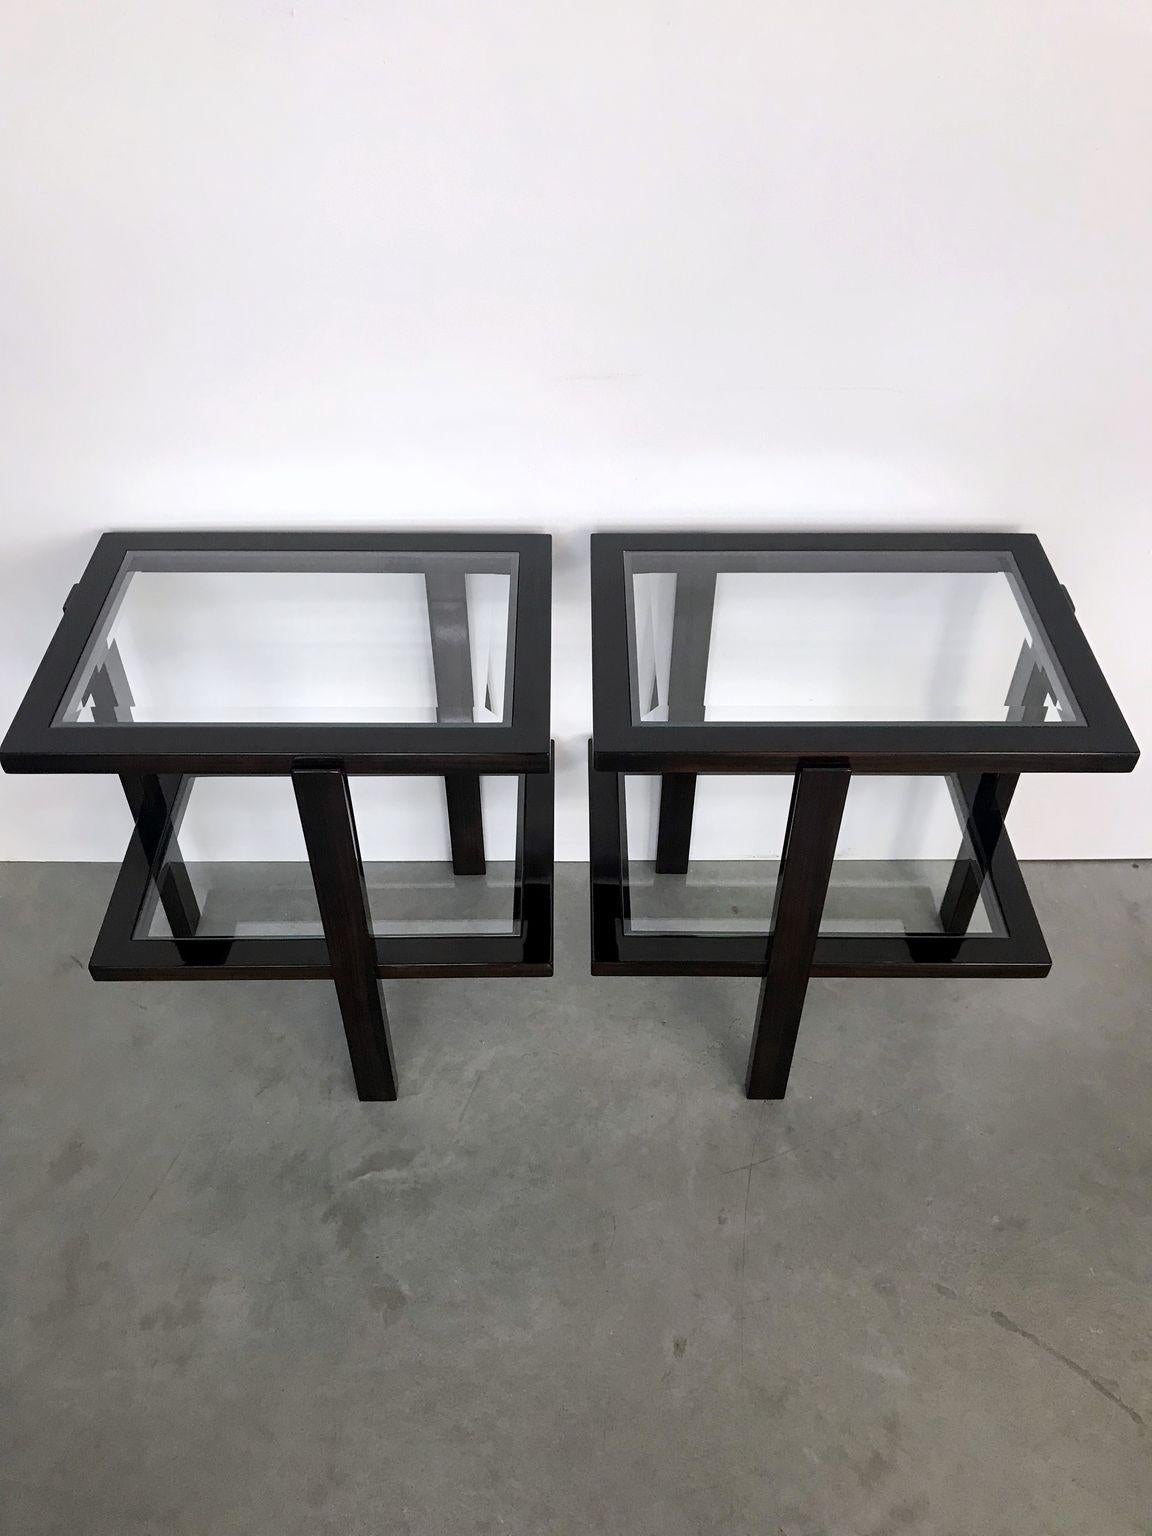 A pair of Art Deco side tables with glass. Colorized walnut wood with new polished glasses.